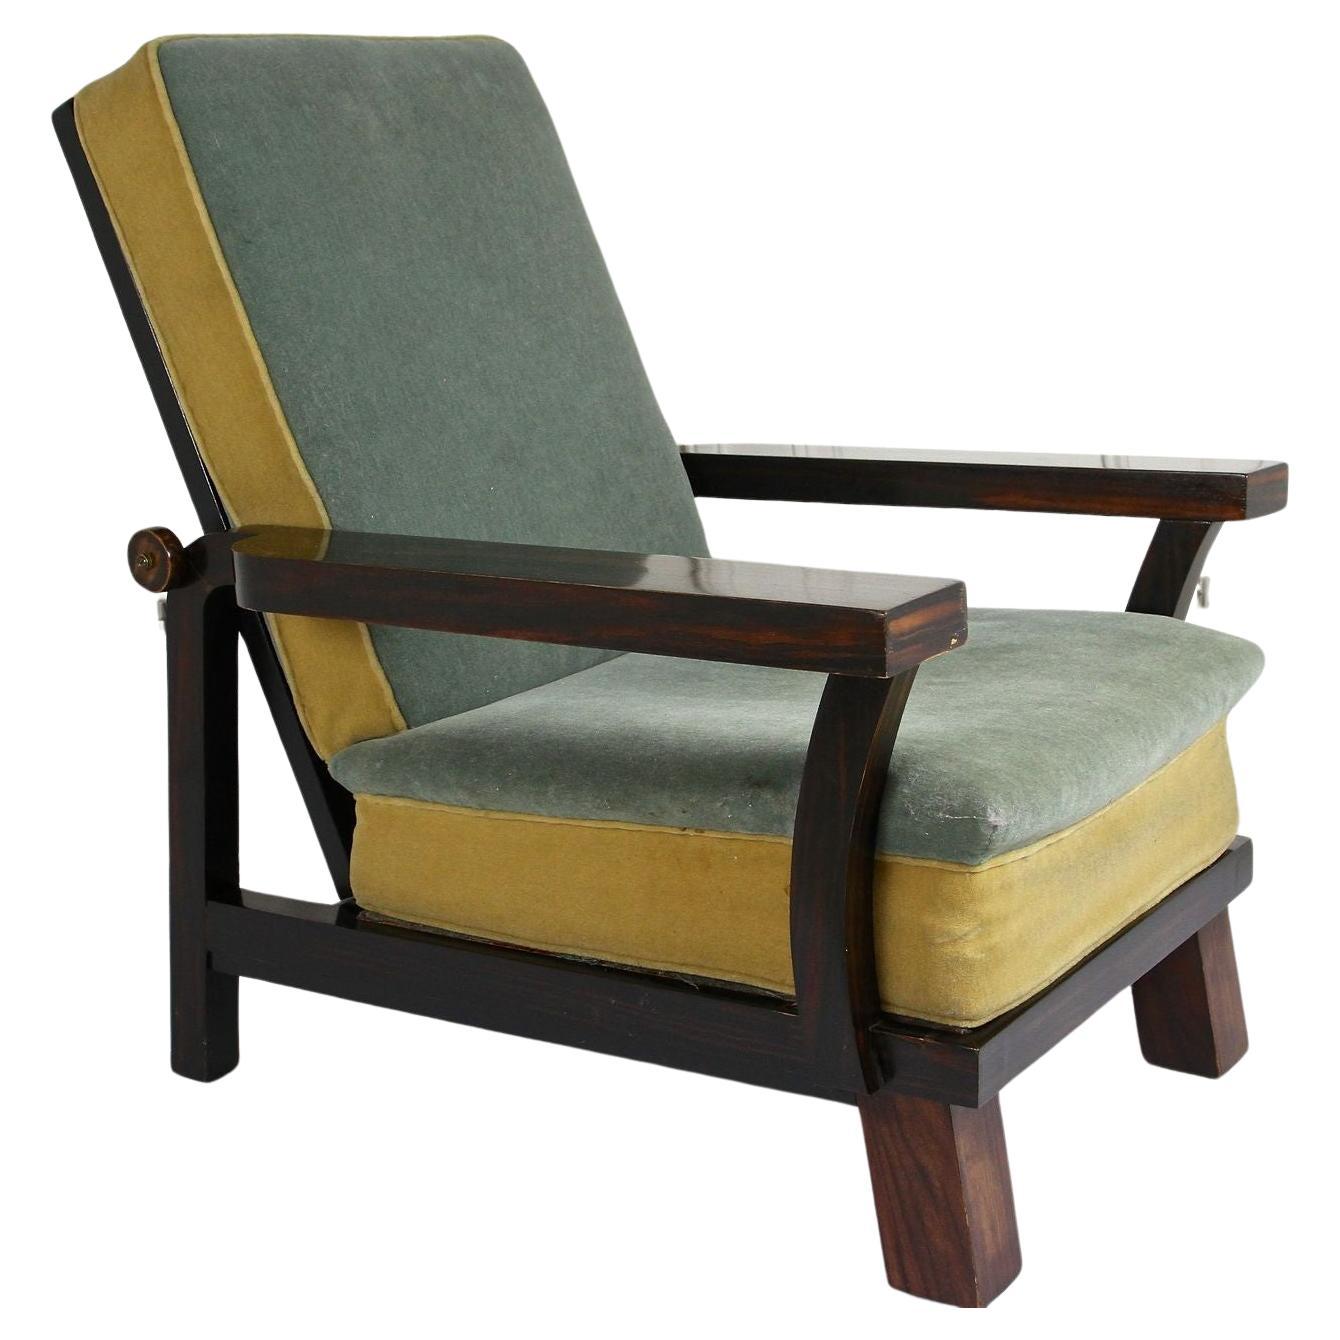 20th Century Art Deco Armchair "Sitzmaschine" by Fritz Gross, AT circa 1935 For Sale